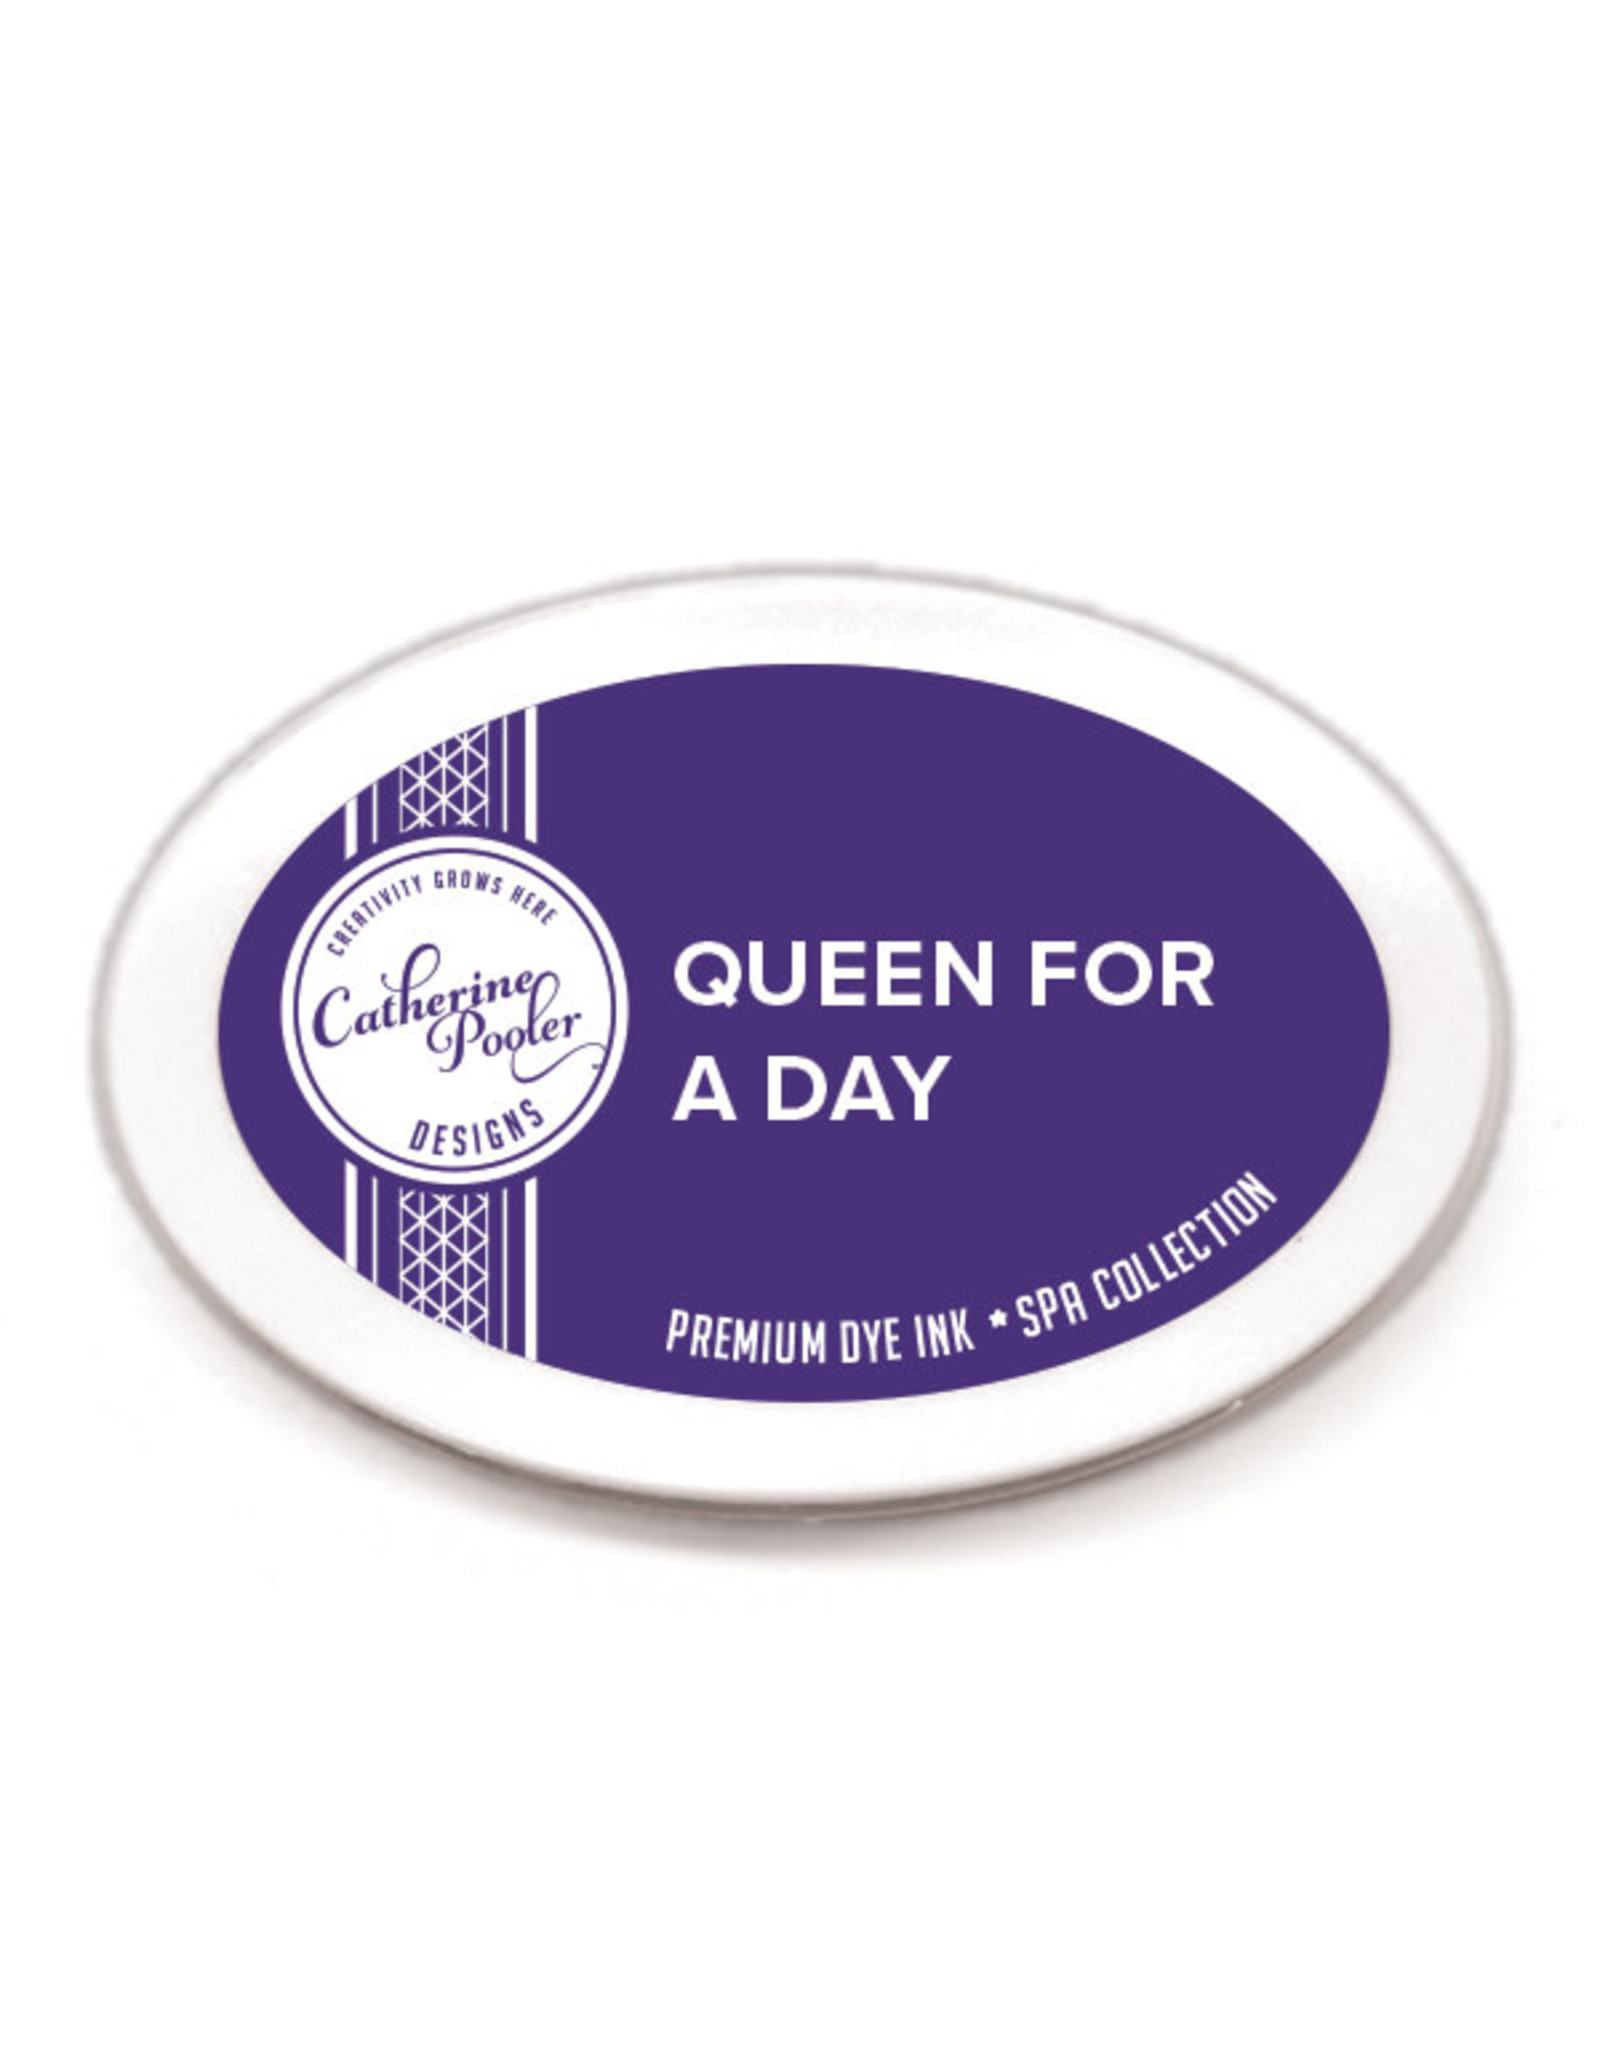 Catherine Pooler Designs Queen for a Day ink pad